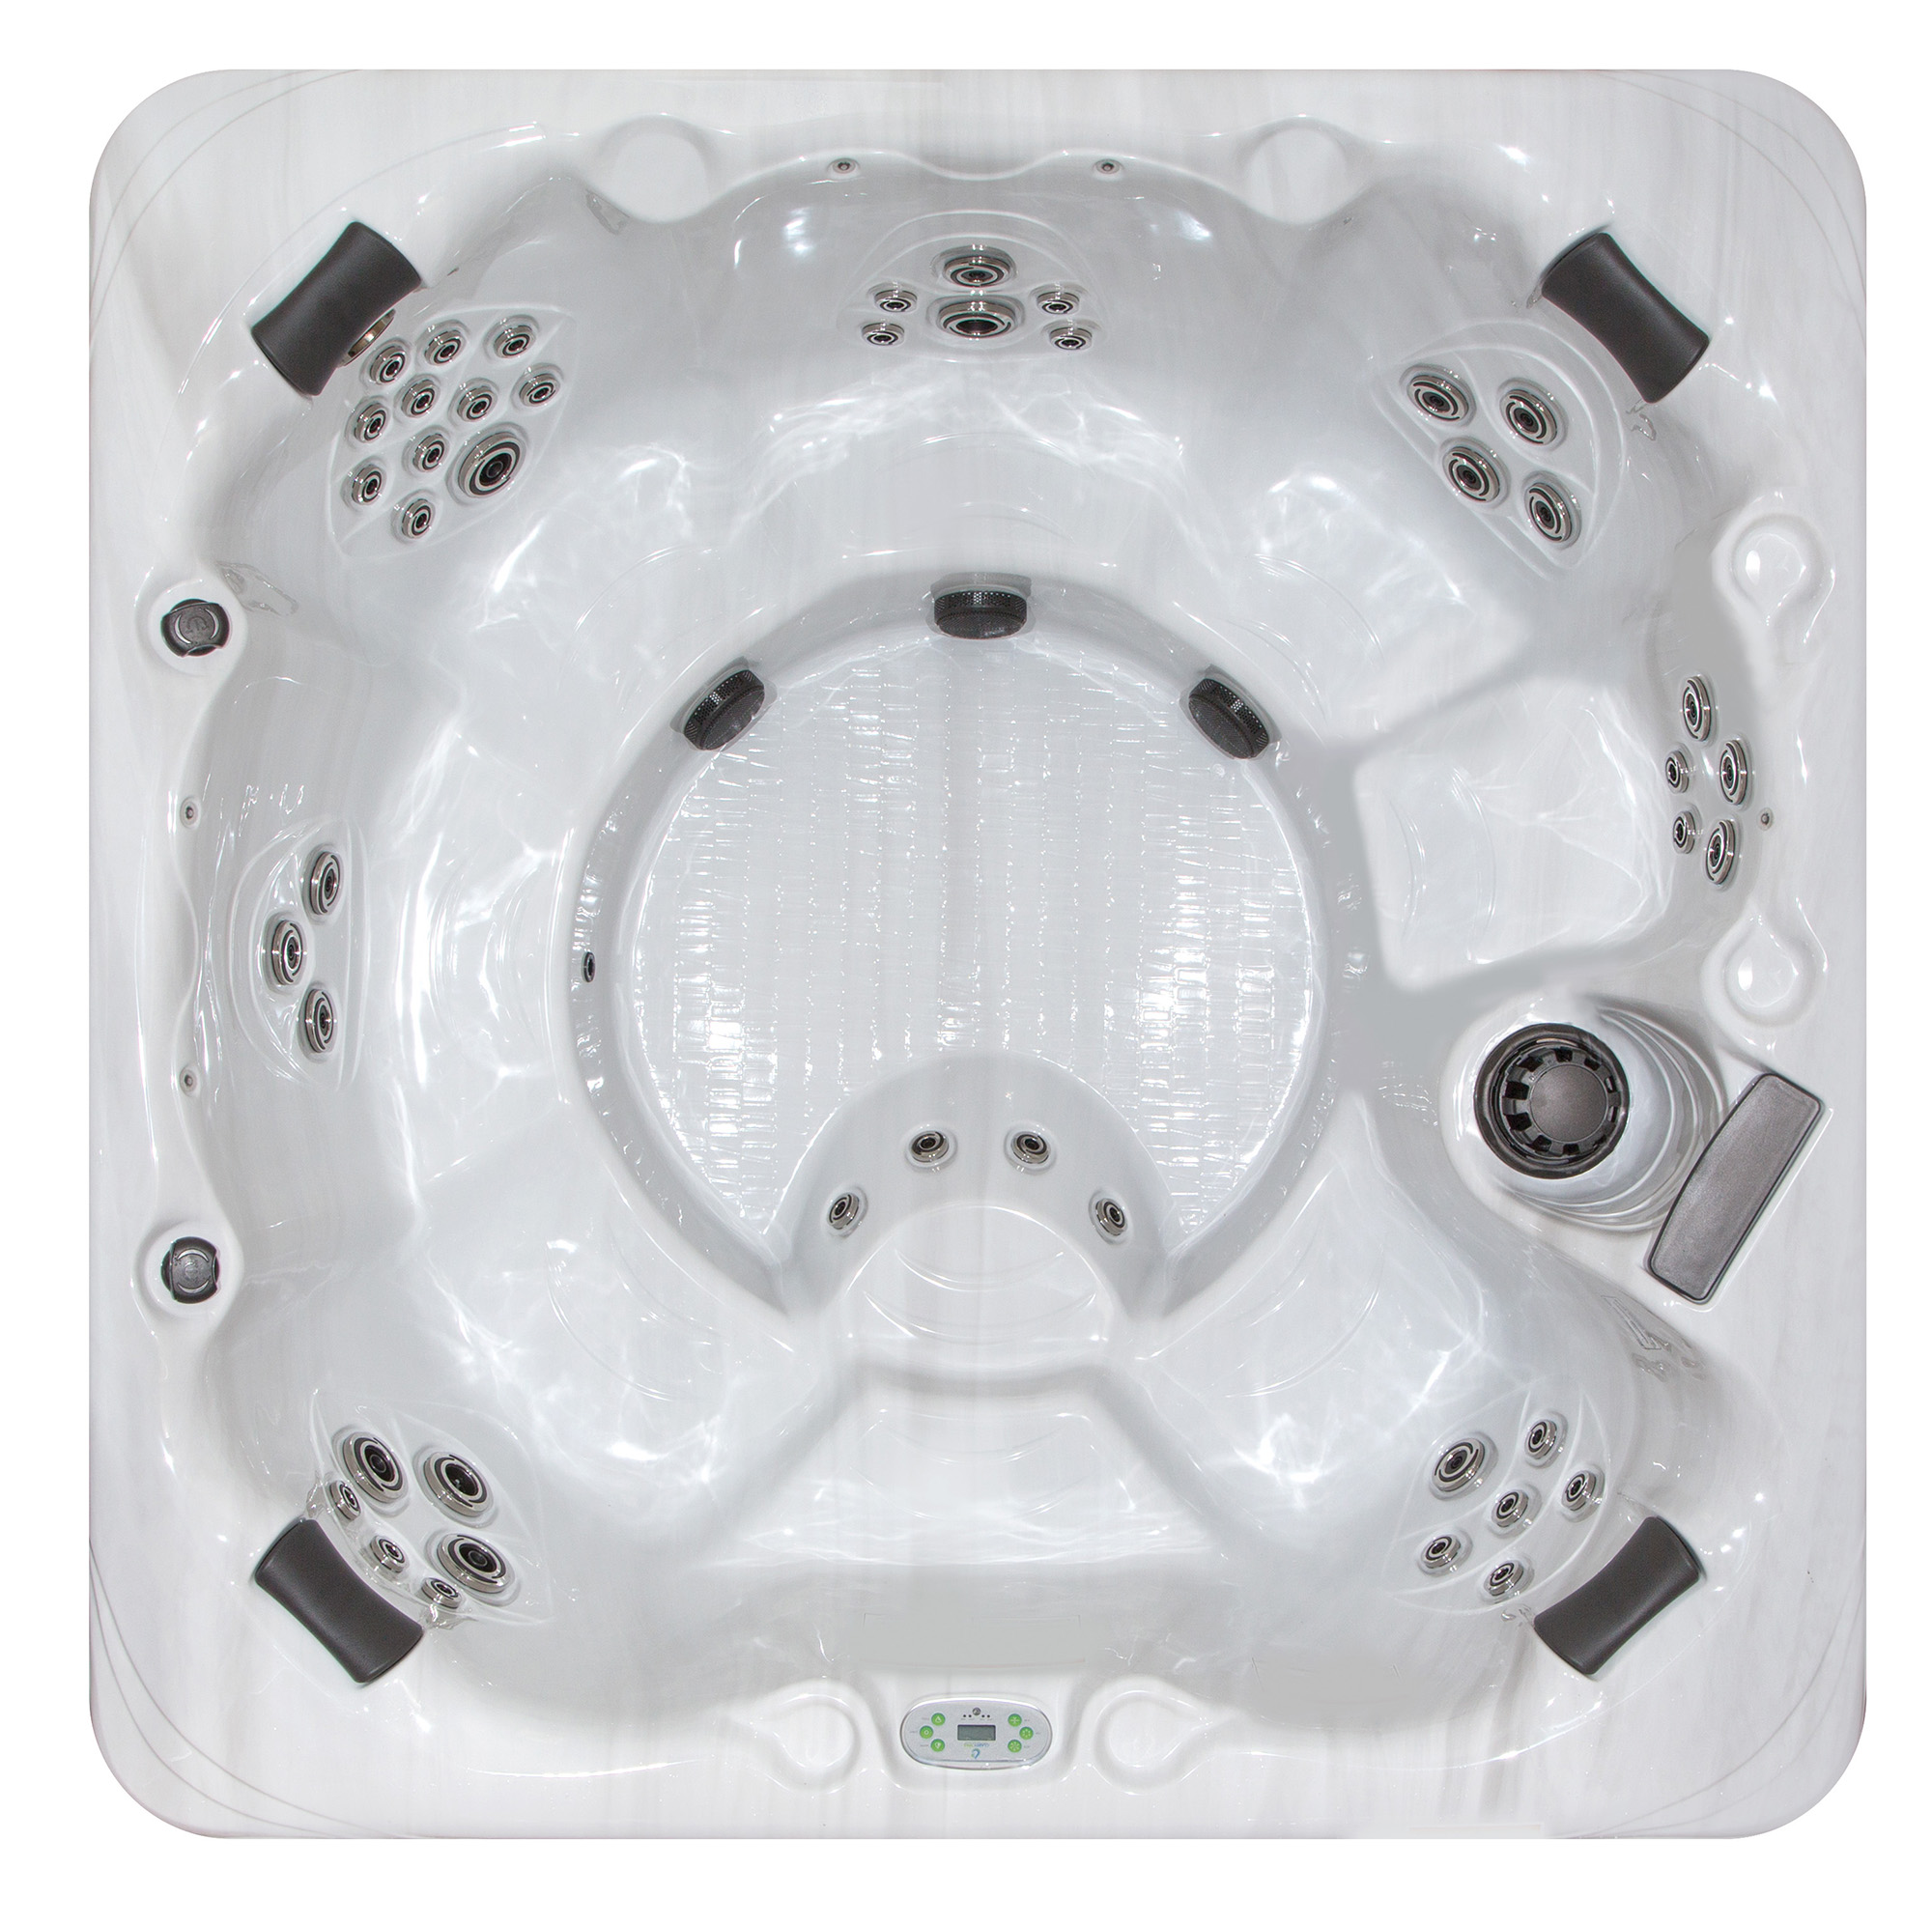 Clarity Spas CLS Precision 8 Hot Tubs